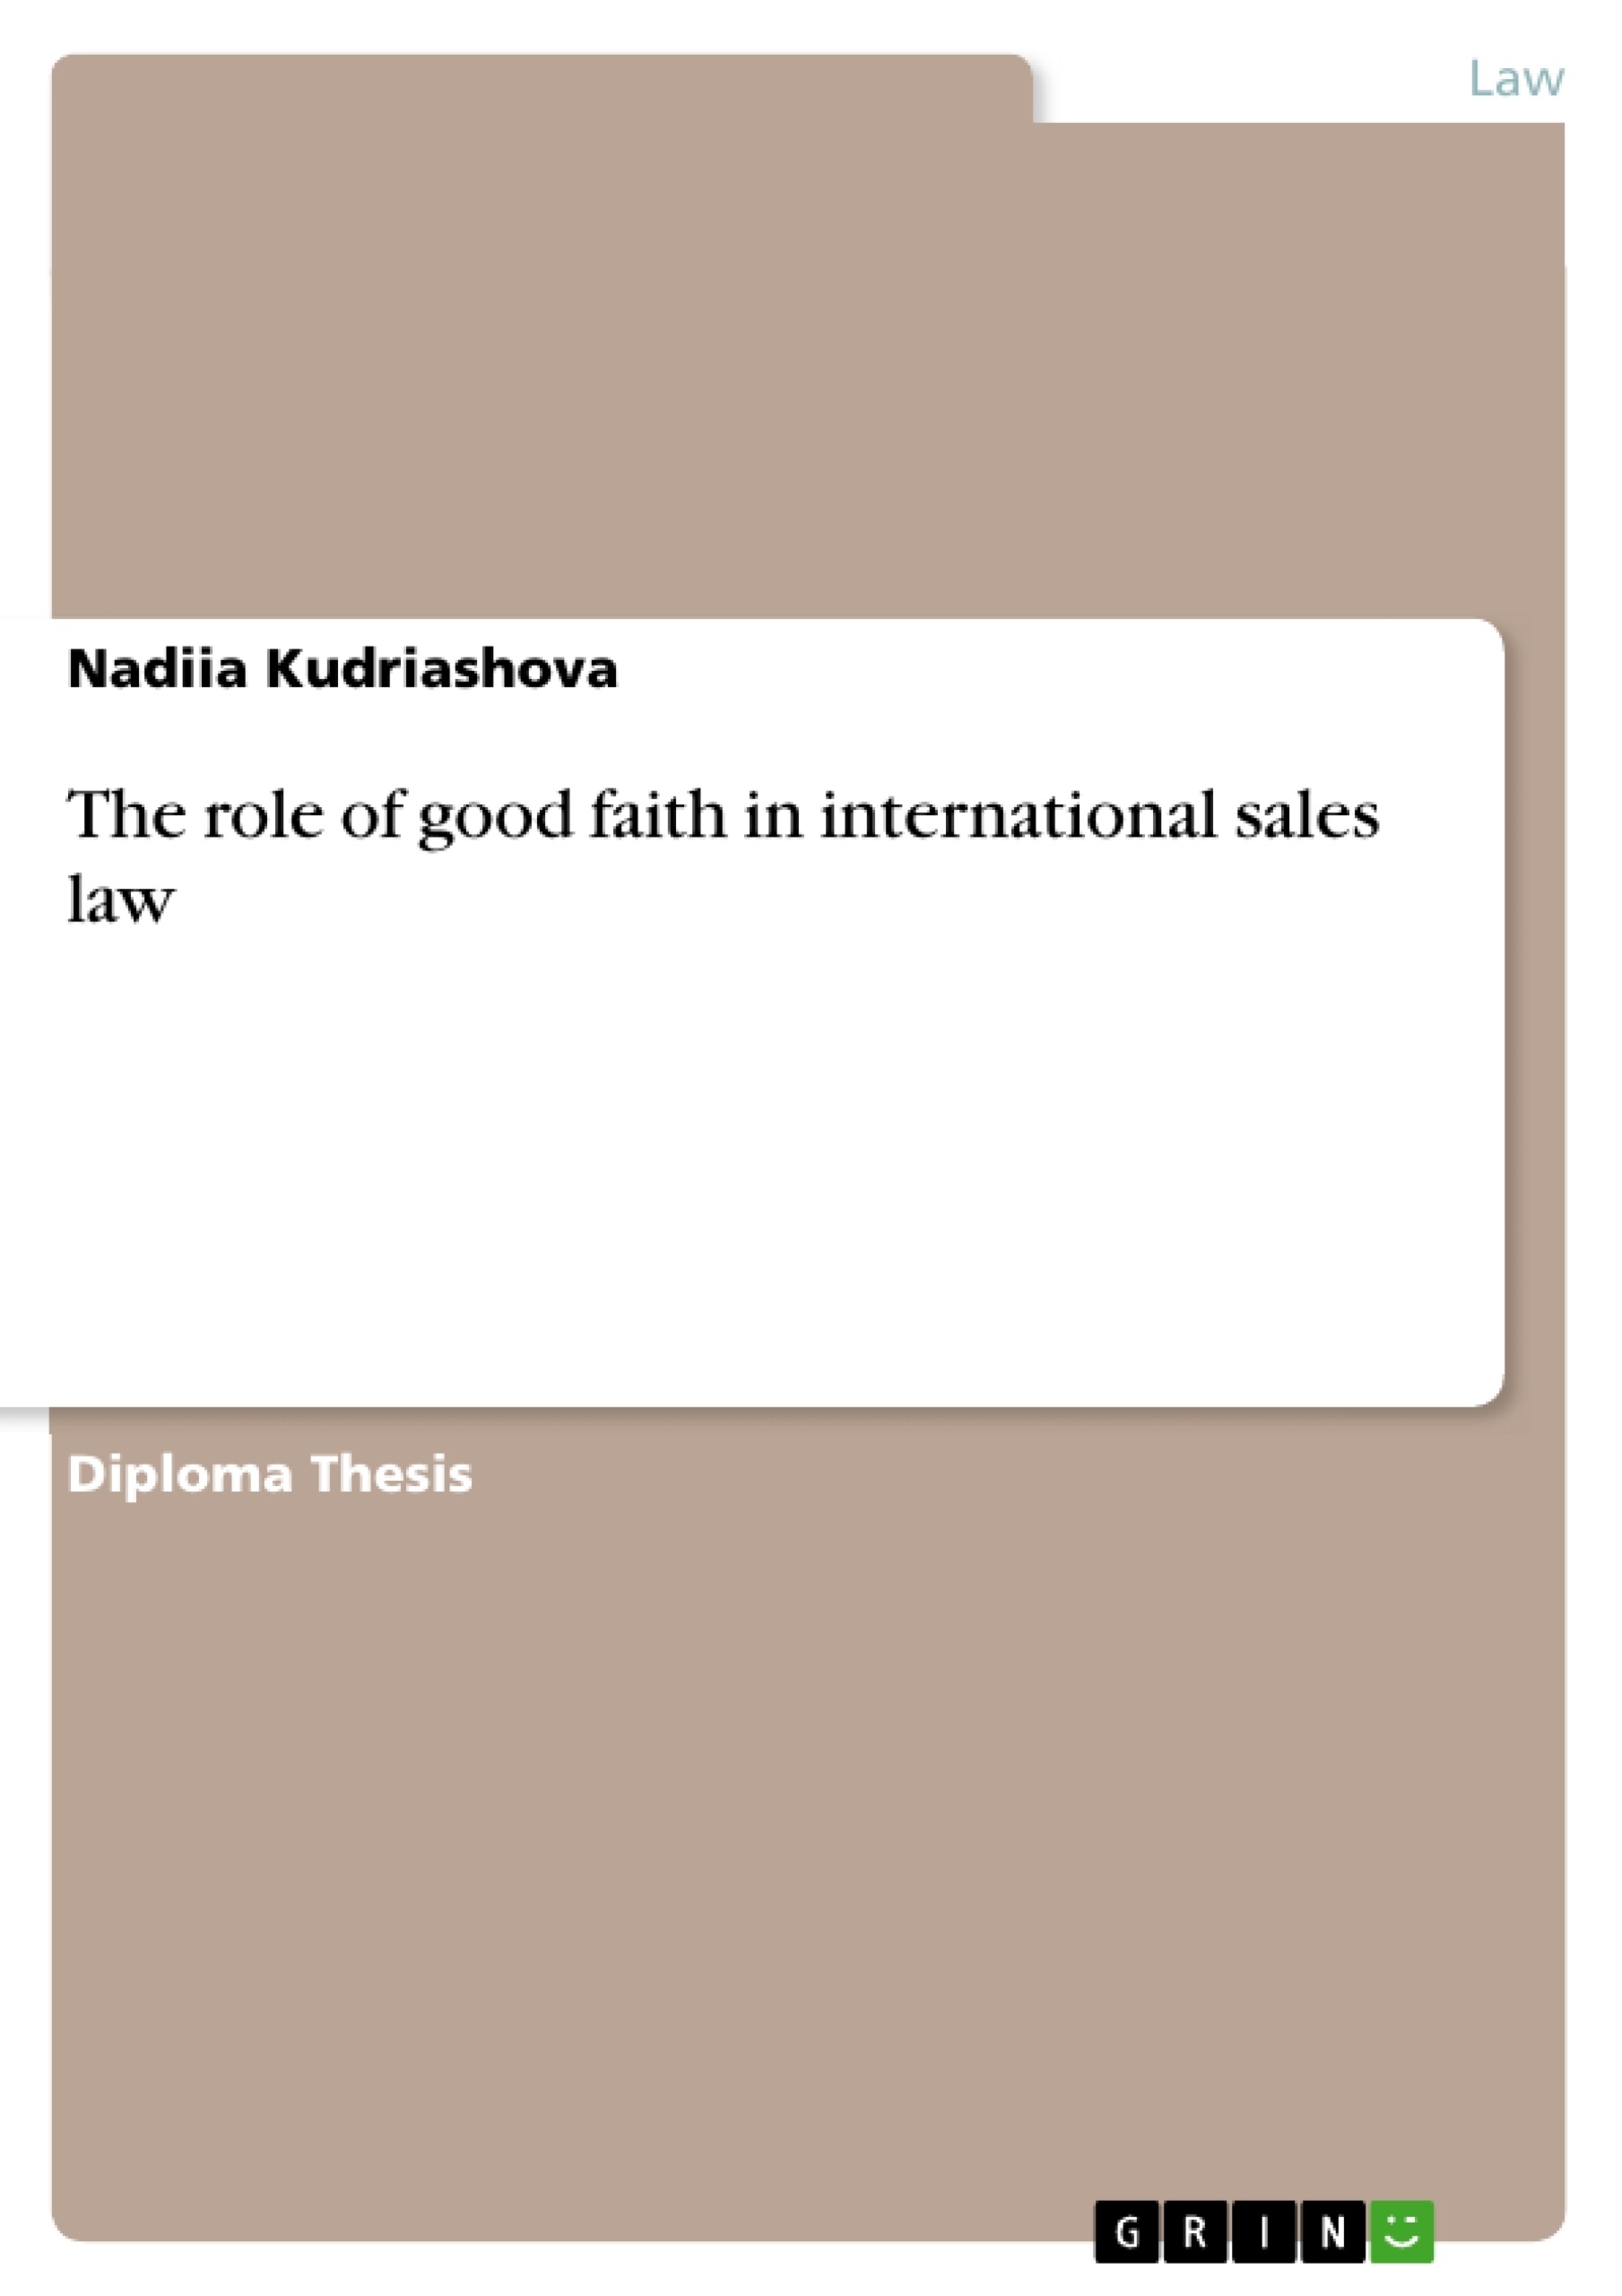 Titre: The role of good faith in international sales law